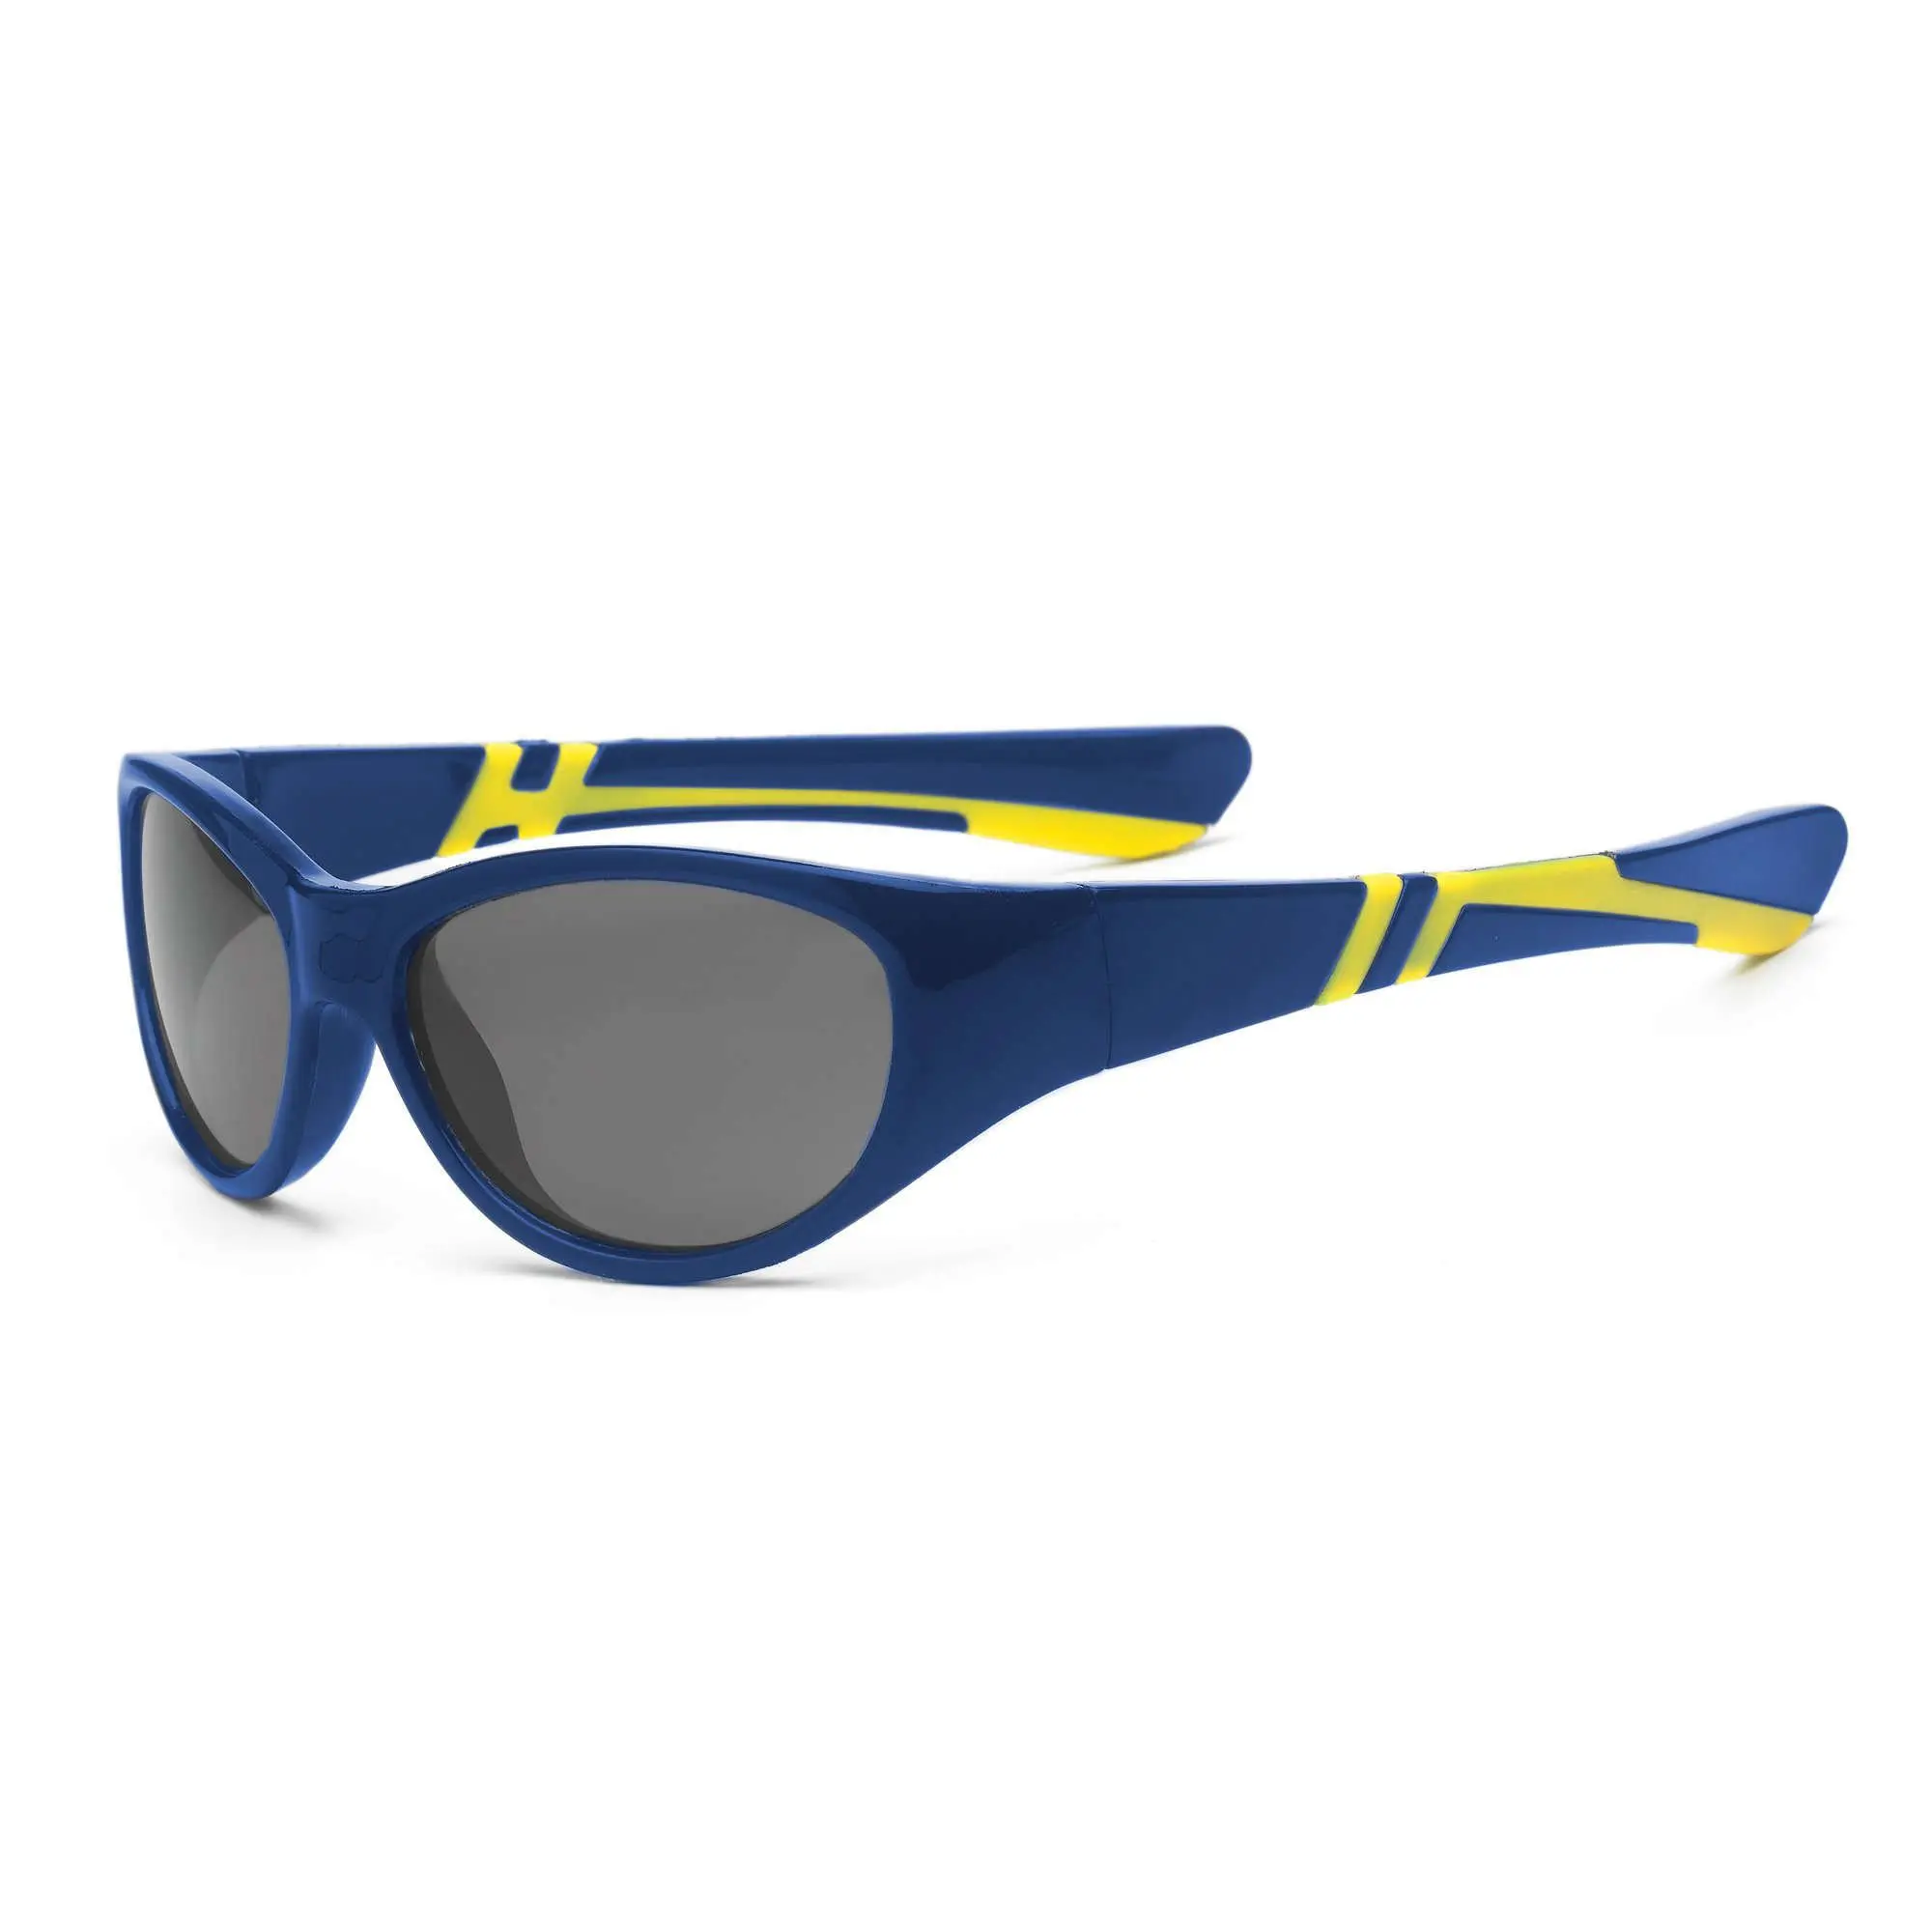 Wrap Around Blue Frame Sunglasses Kids/Childrens 5-9 Years Old With Free Yellow Neckcord Blue Mirrored Lens 